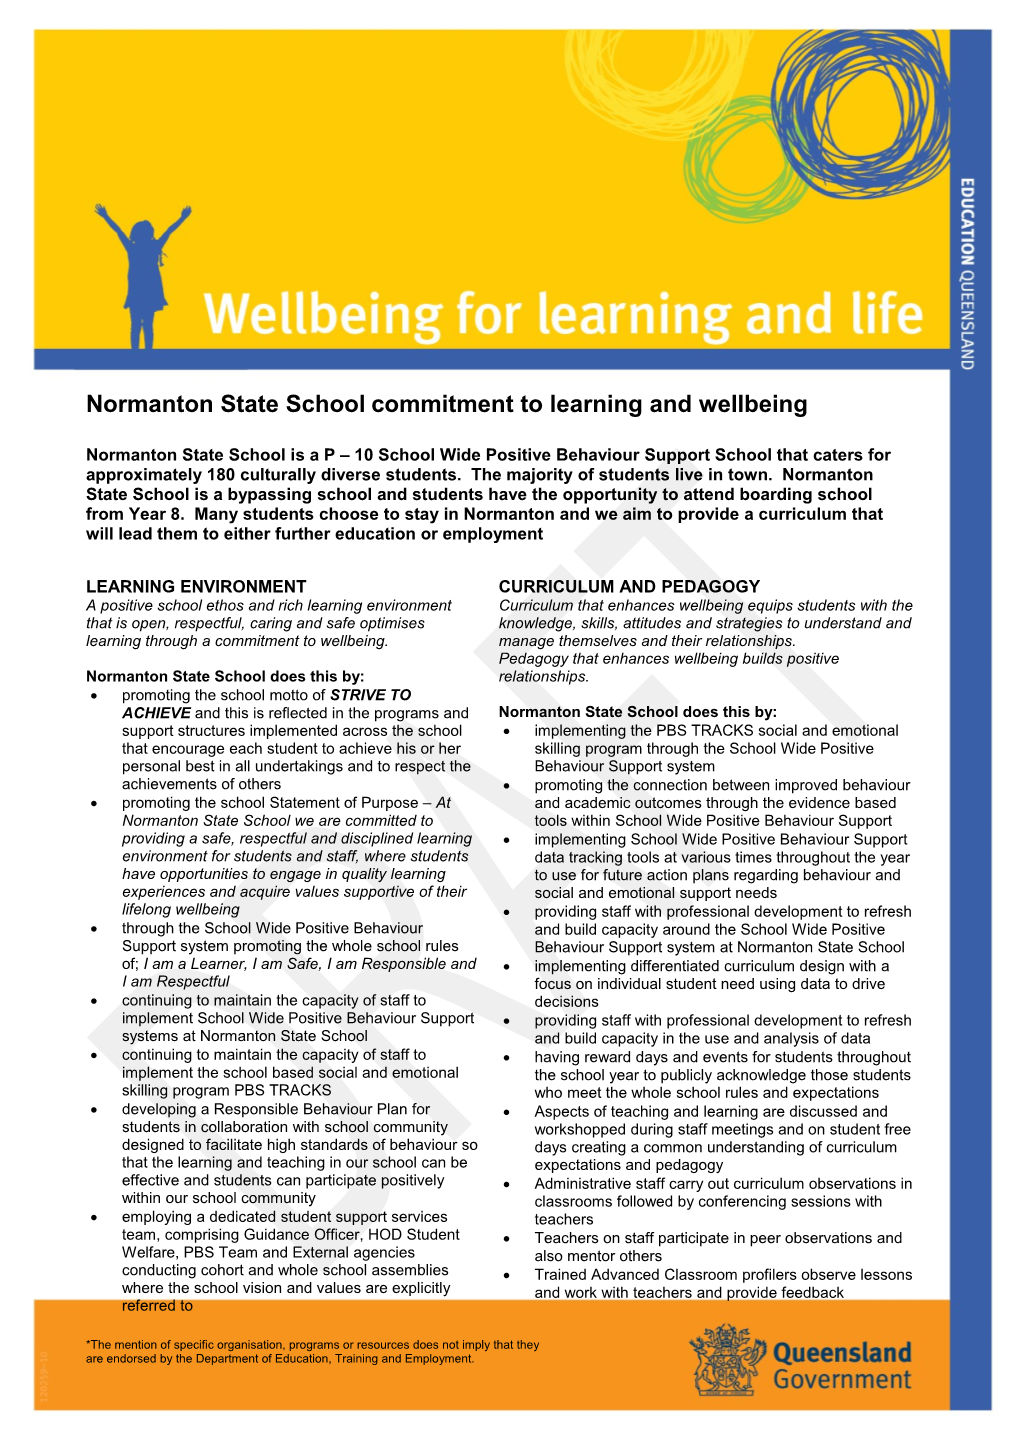 Learning and Wellbeing Case Study